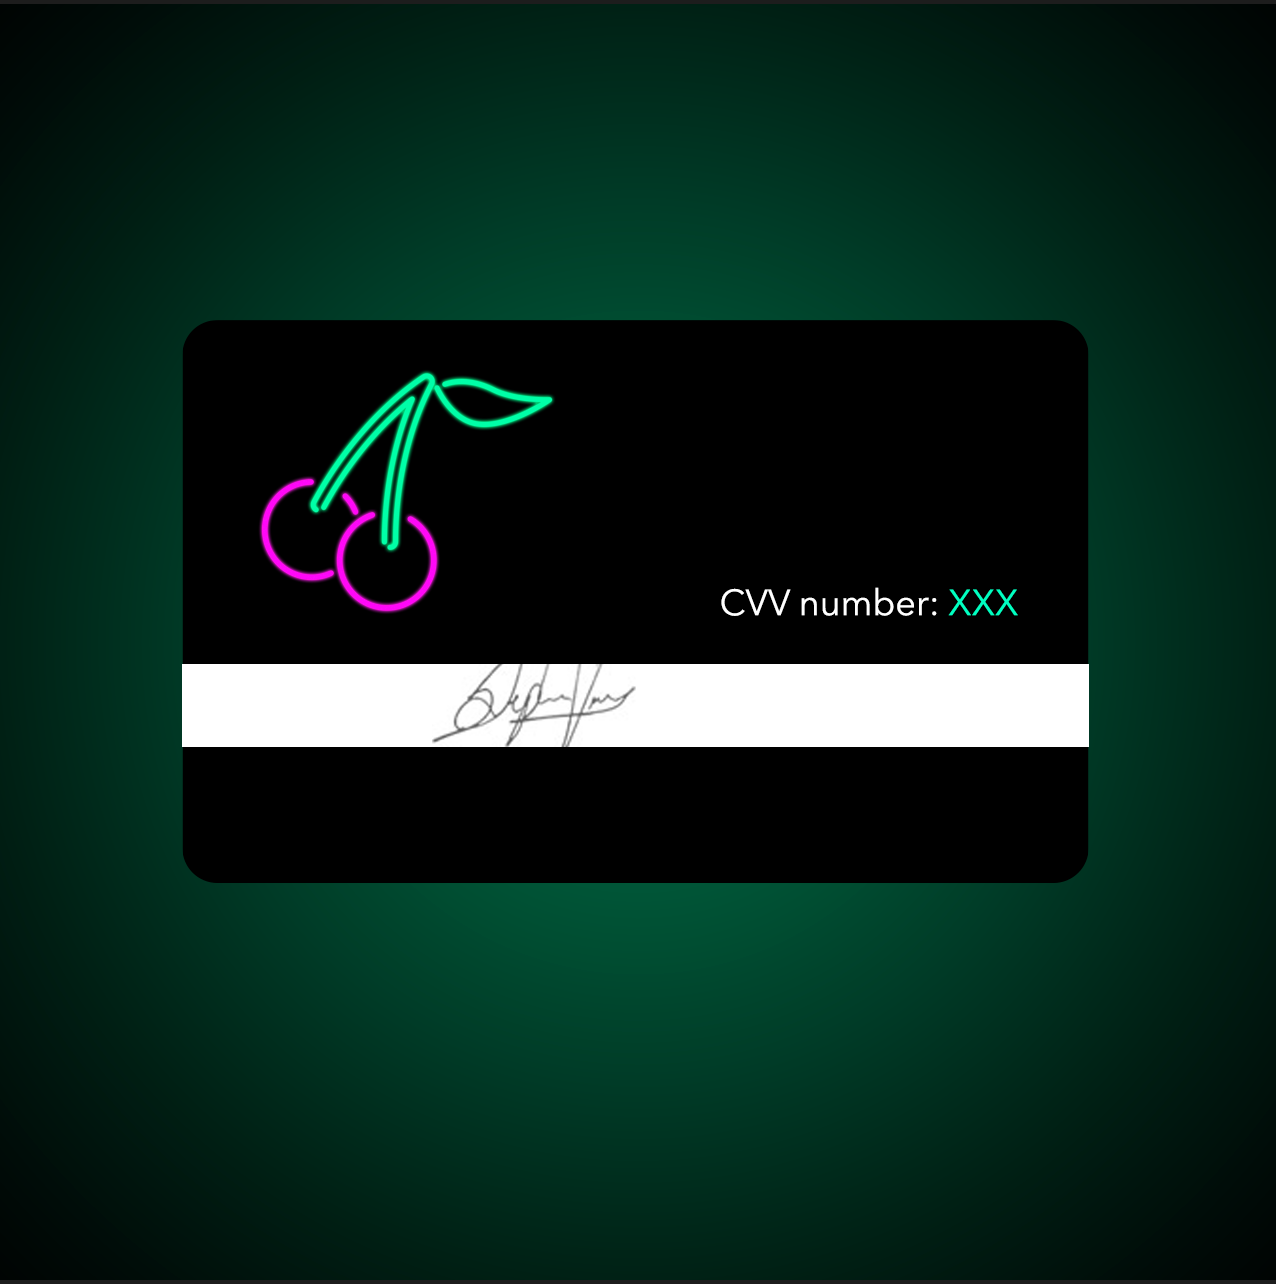 Picture of credit card back